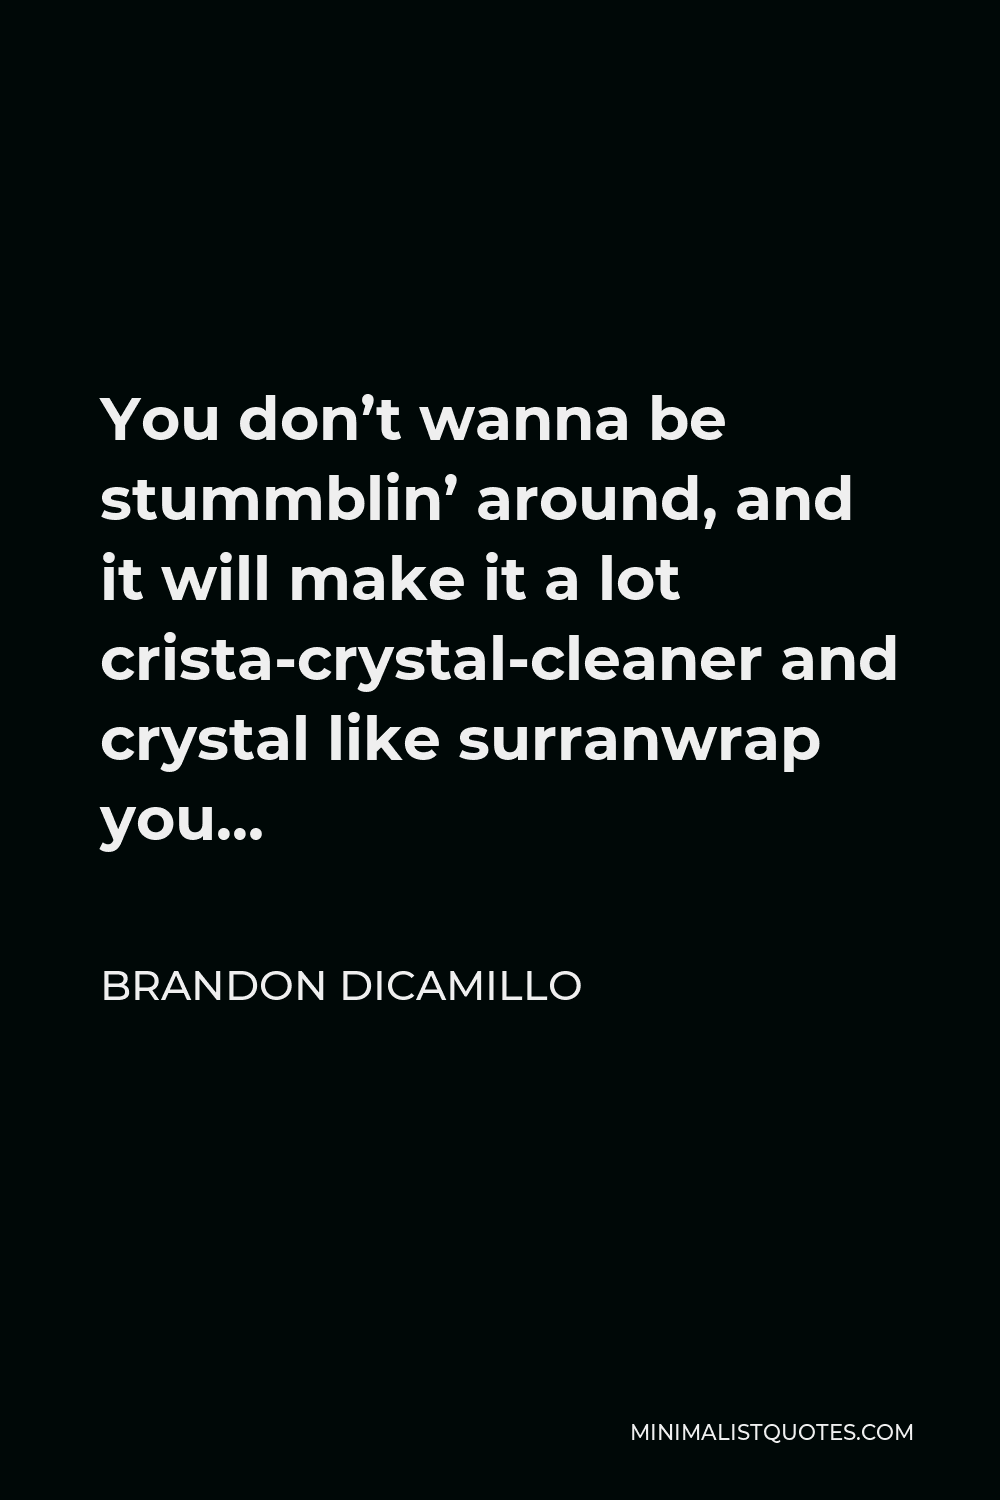 Brandon DiCamillo Quote - You don’t wanna be stummblin’ around, and it will make it a lot crista-crystal-cleaner and crystal like surranwrap you…